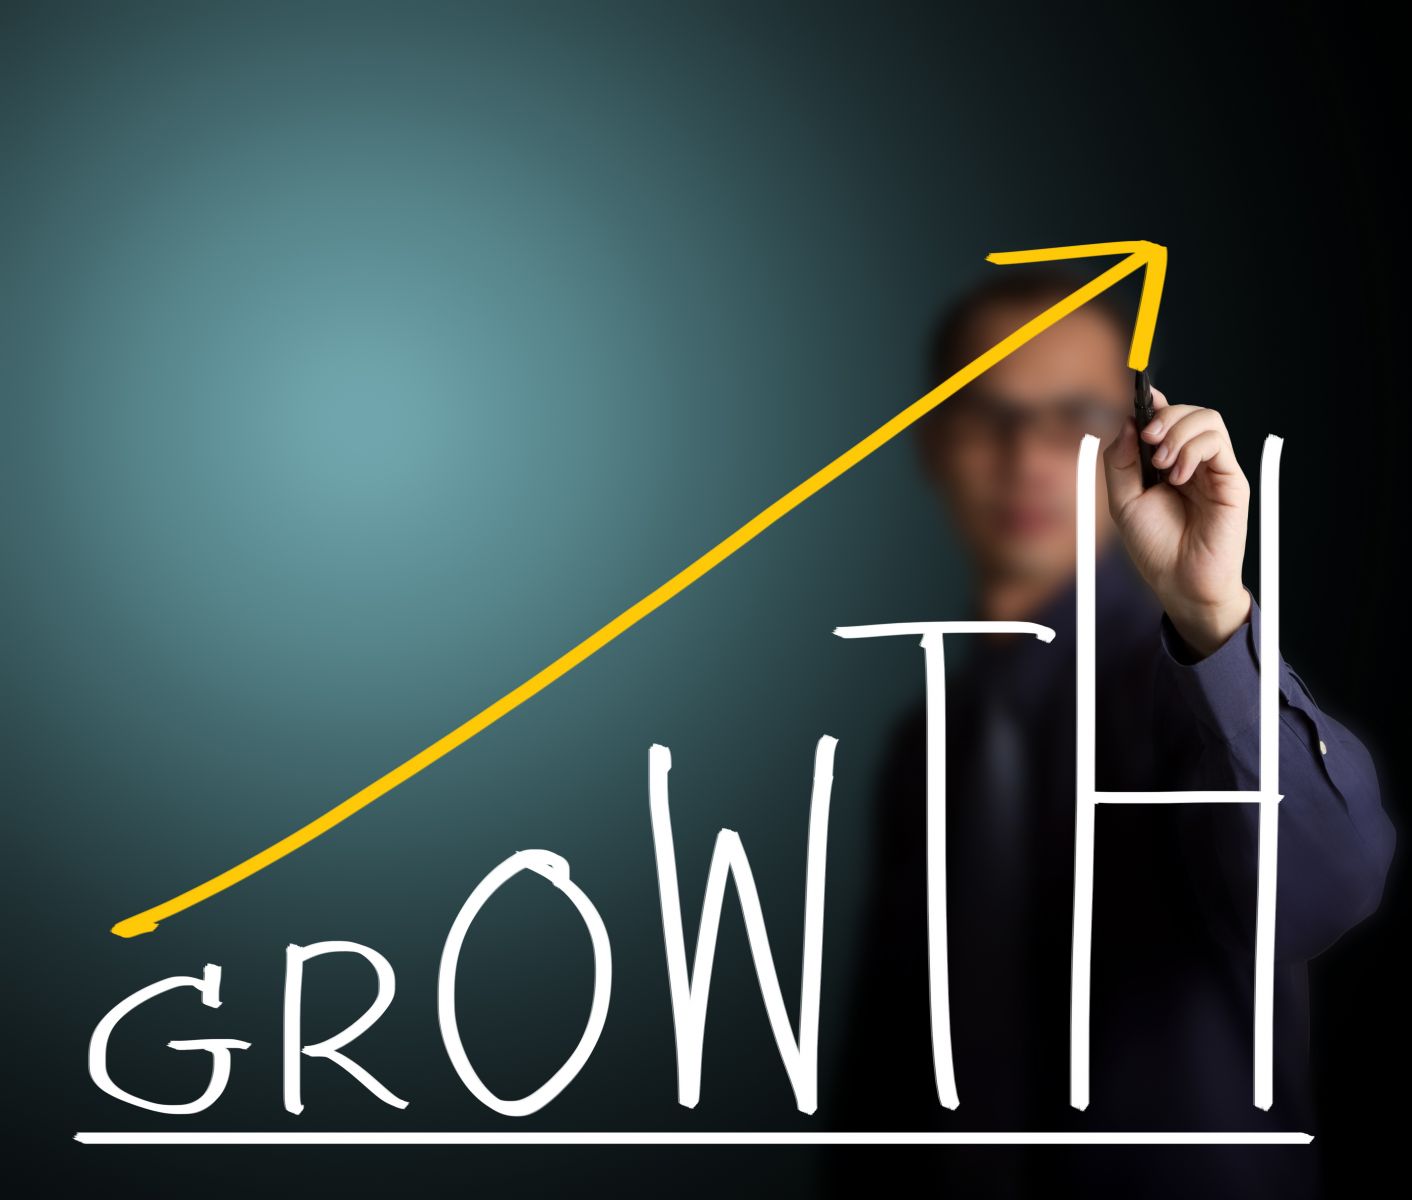 Sales organizations are in 'growth mode' for 2014